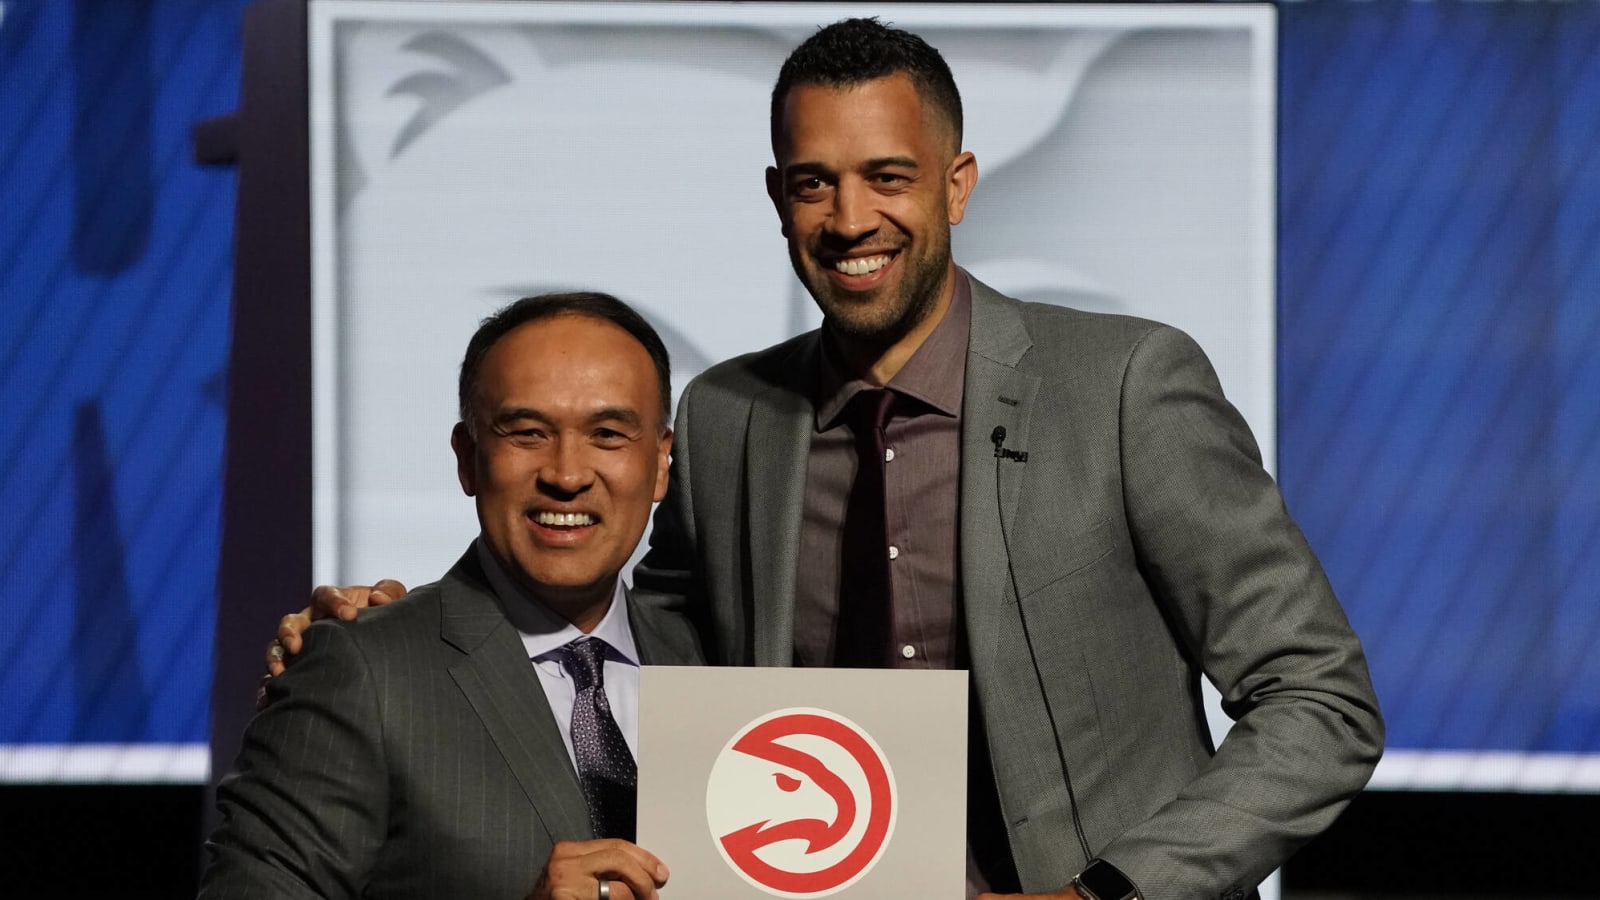 'Wild result': What NBA insider expects Hawks will do with #1 pick